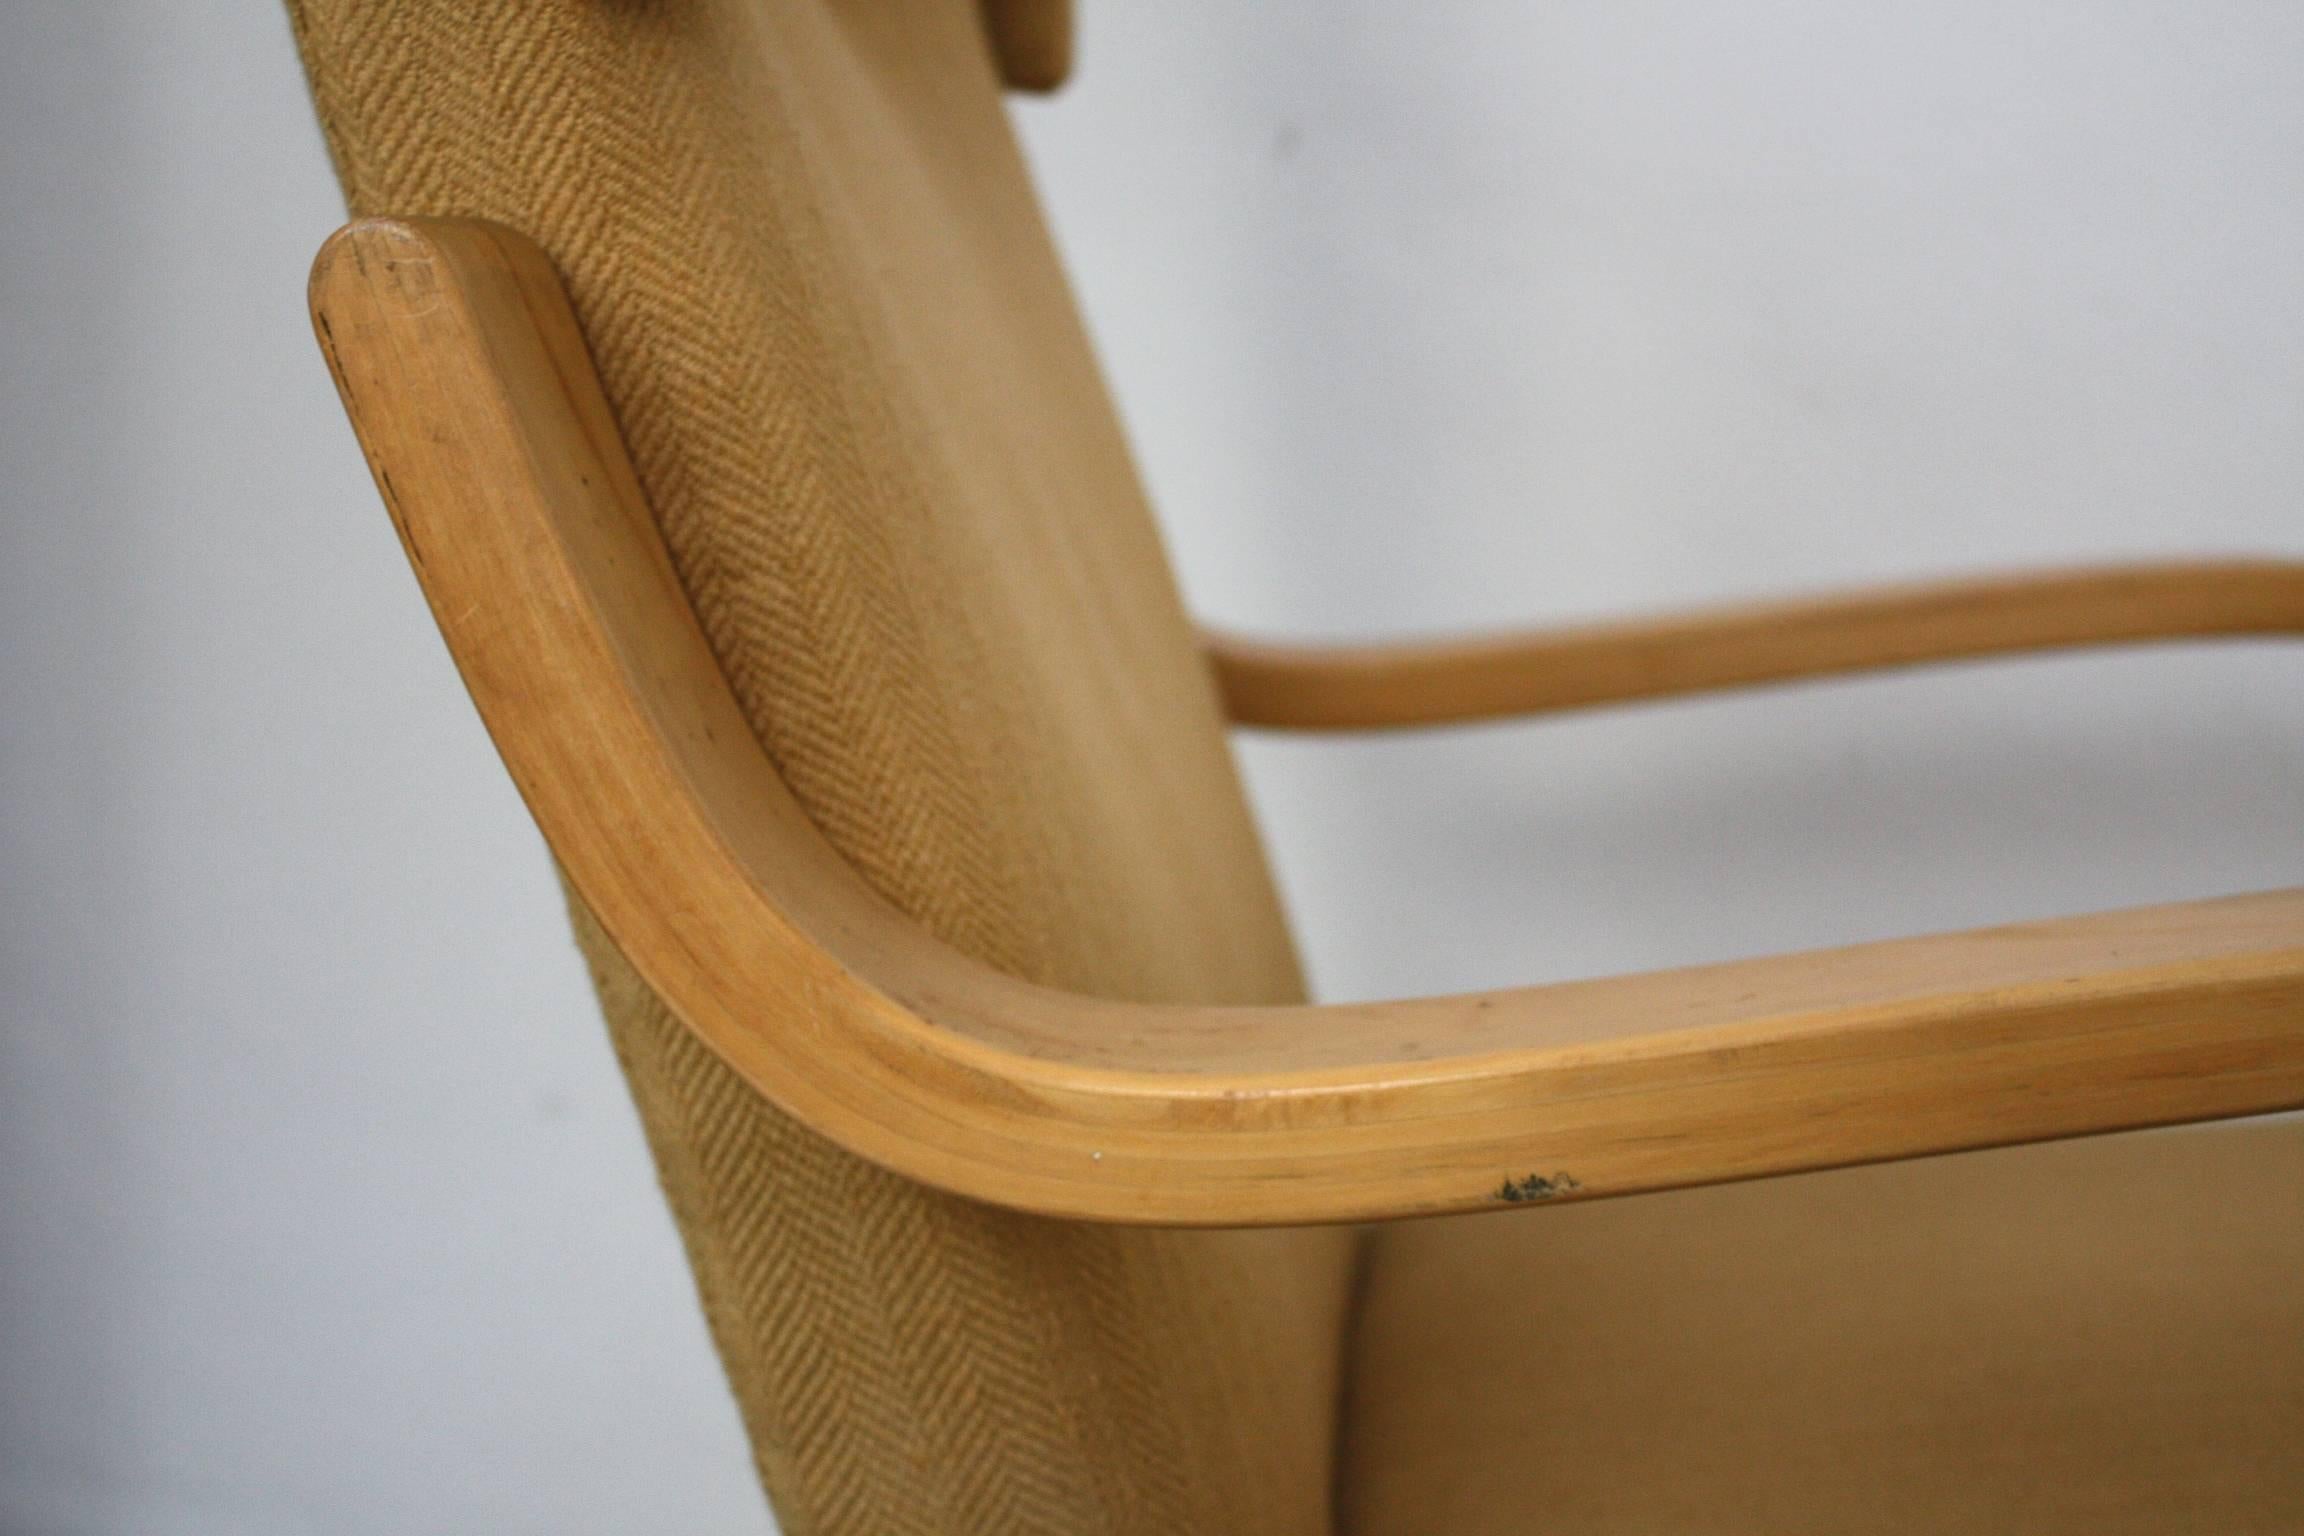 Armchair model 401 designed in 1933 by Alvar Aalto. Birch structure, seat and back covered in fabric. Very good conditions.